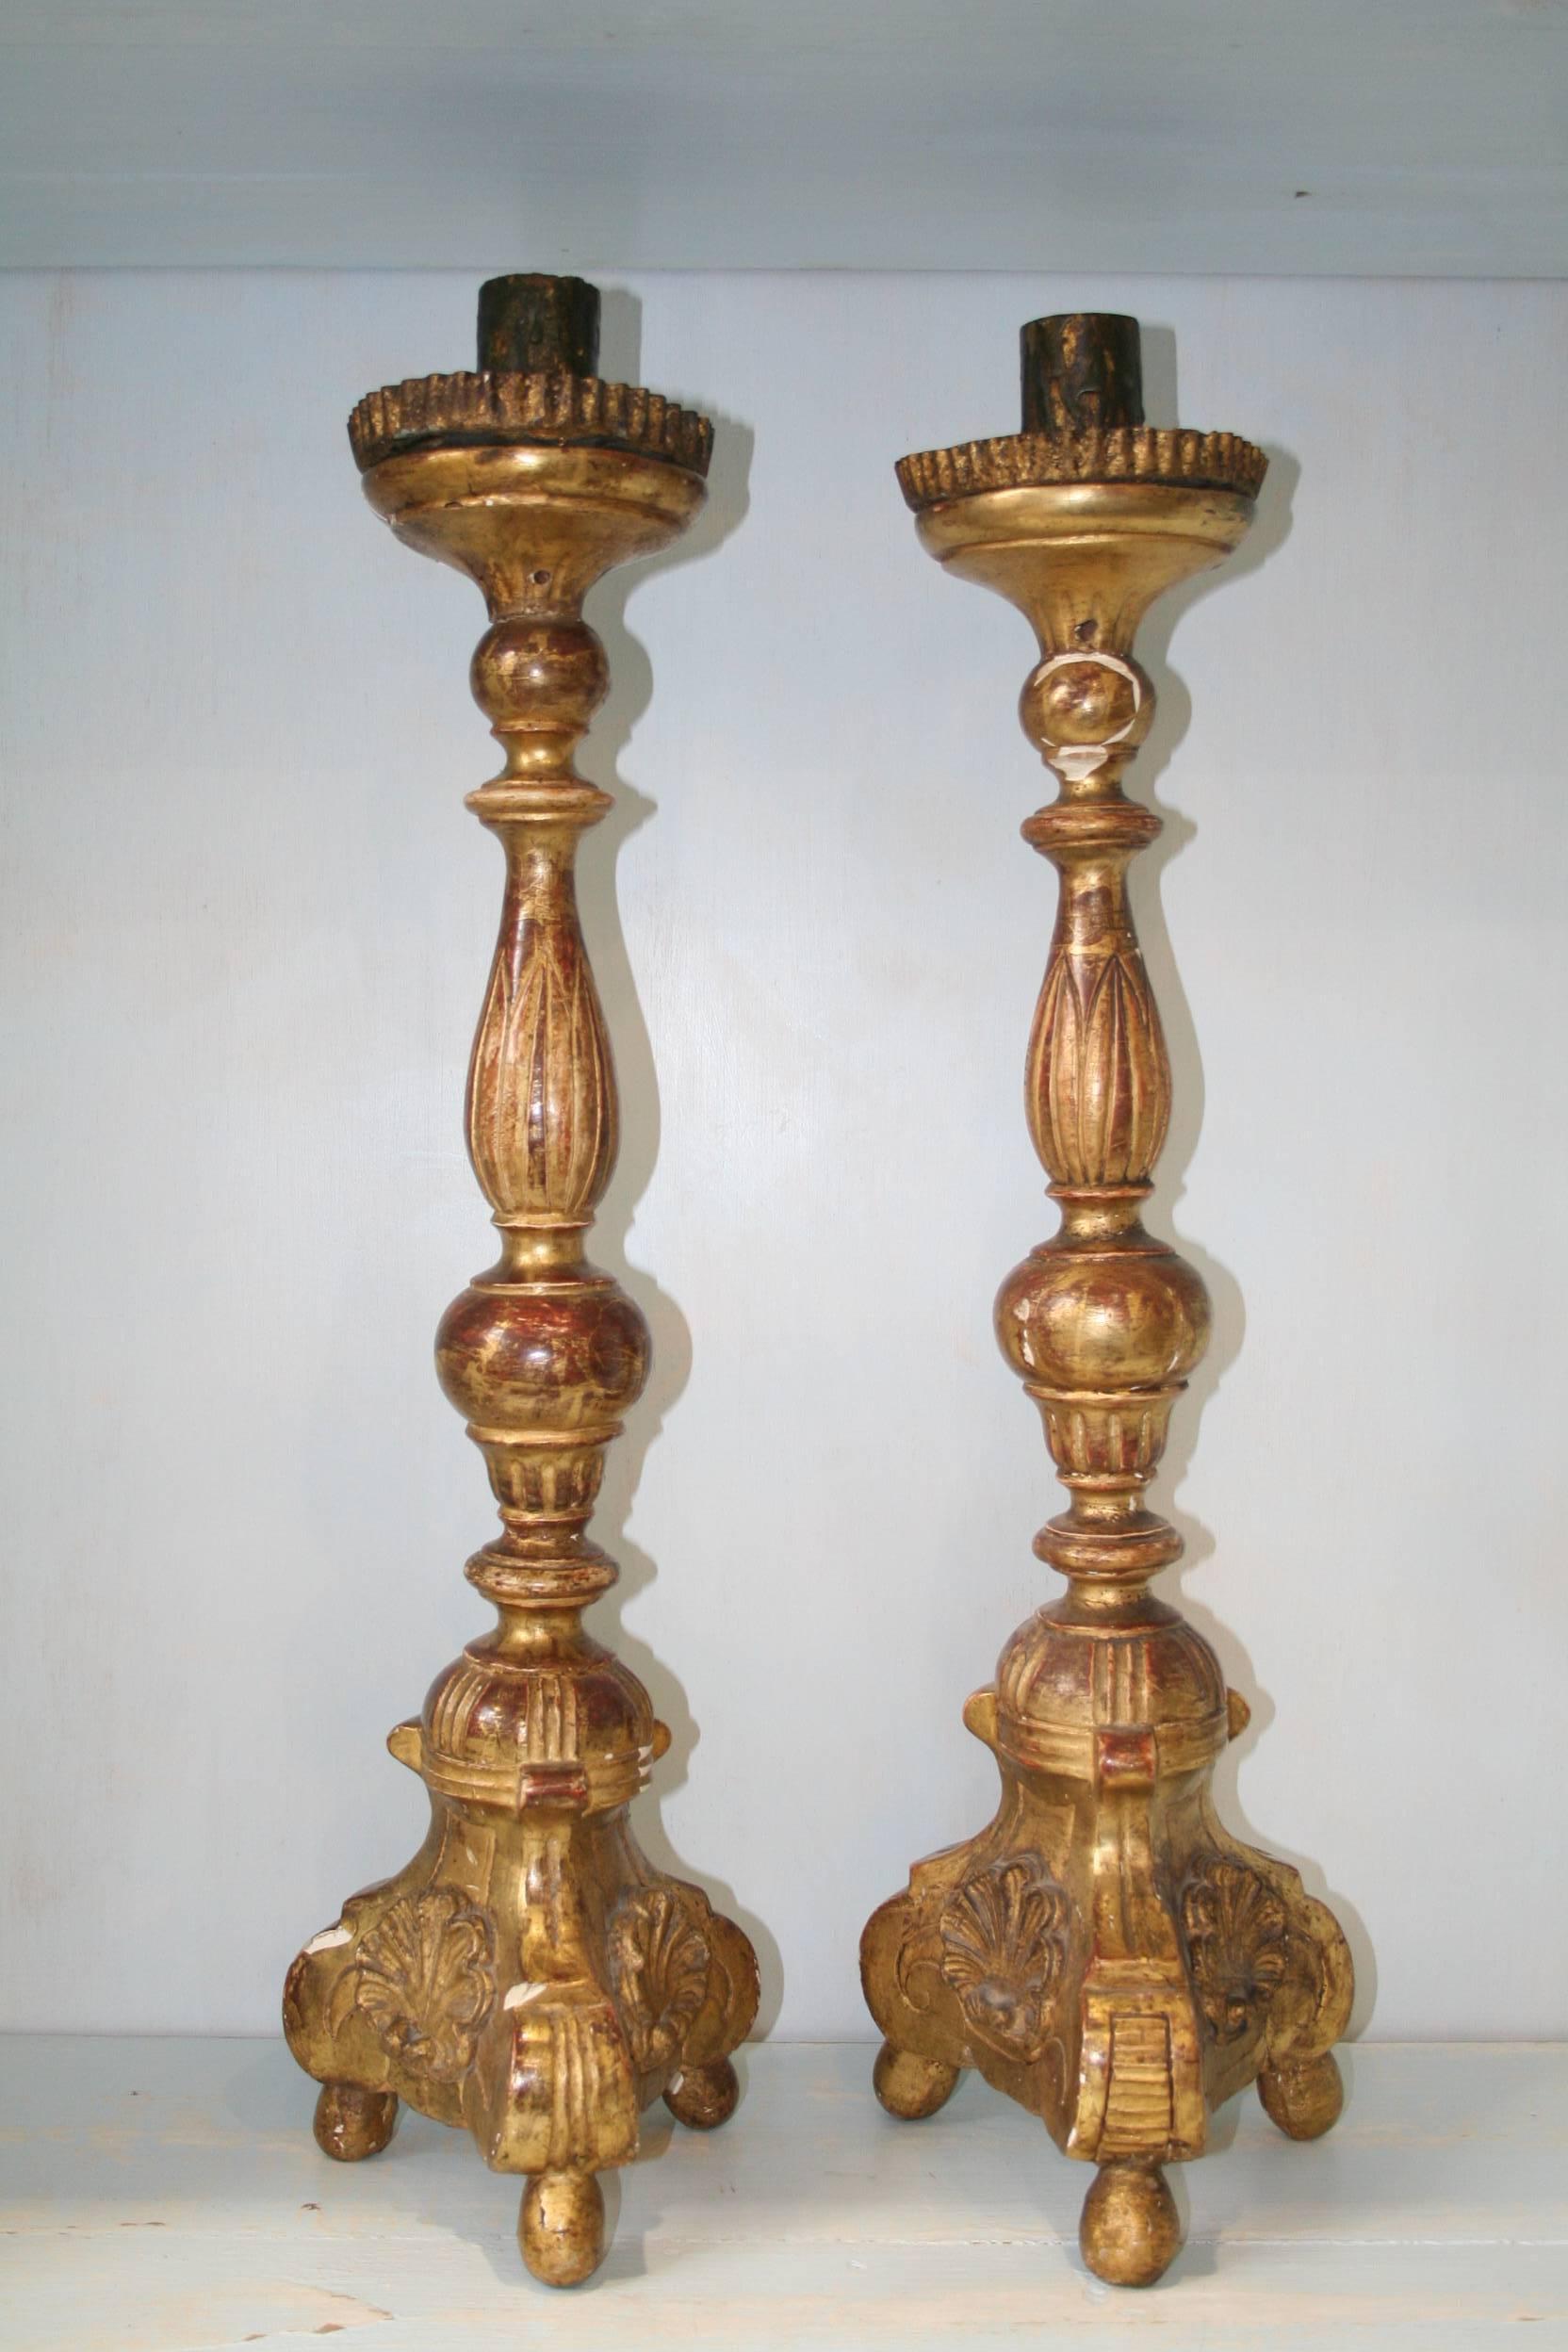 Pair of 18th century Italian candleholders in wood with their original golden patina.